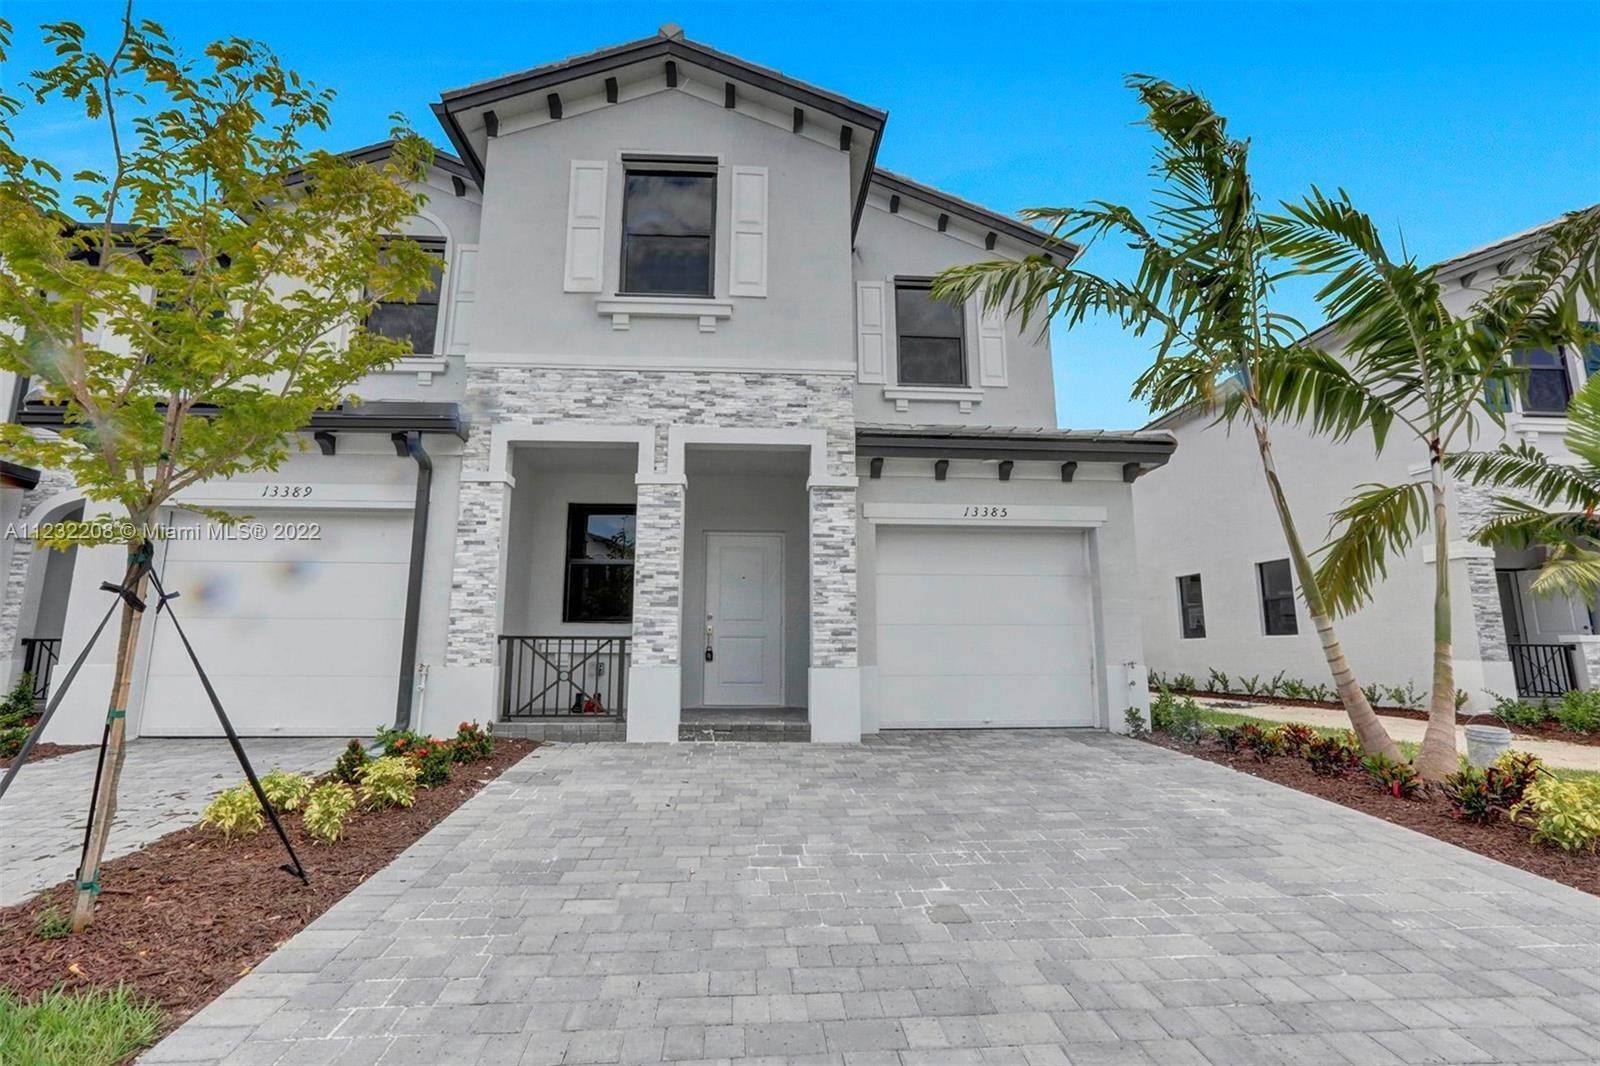 Townhouse at Homestead, FL 33033